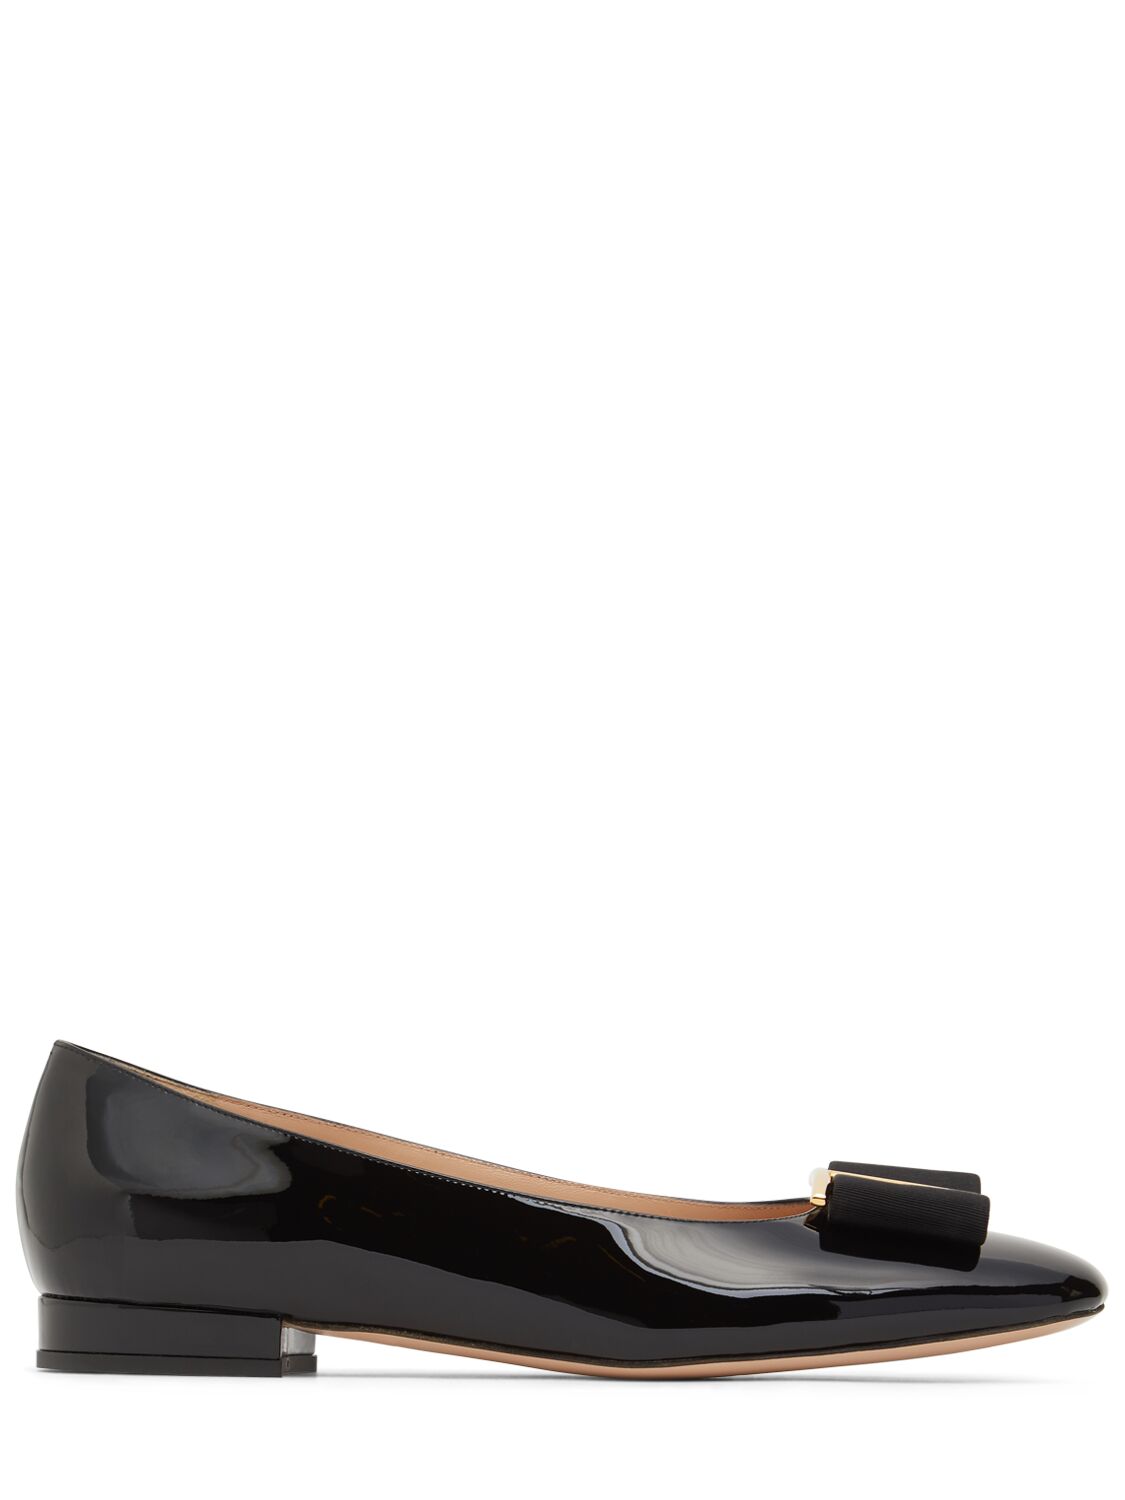 Tom Ford 10mm Patent Leather Ballerina Flats In Black